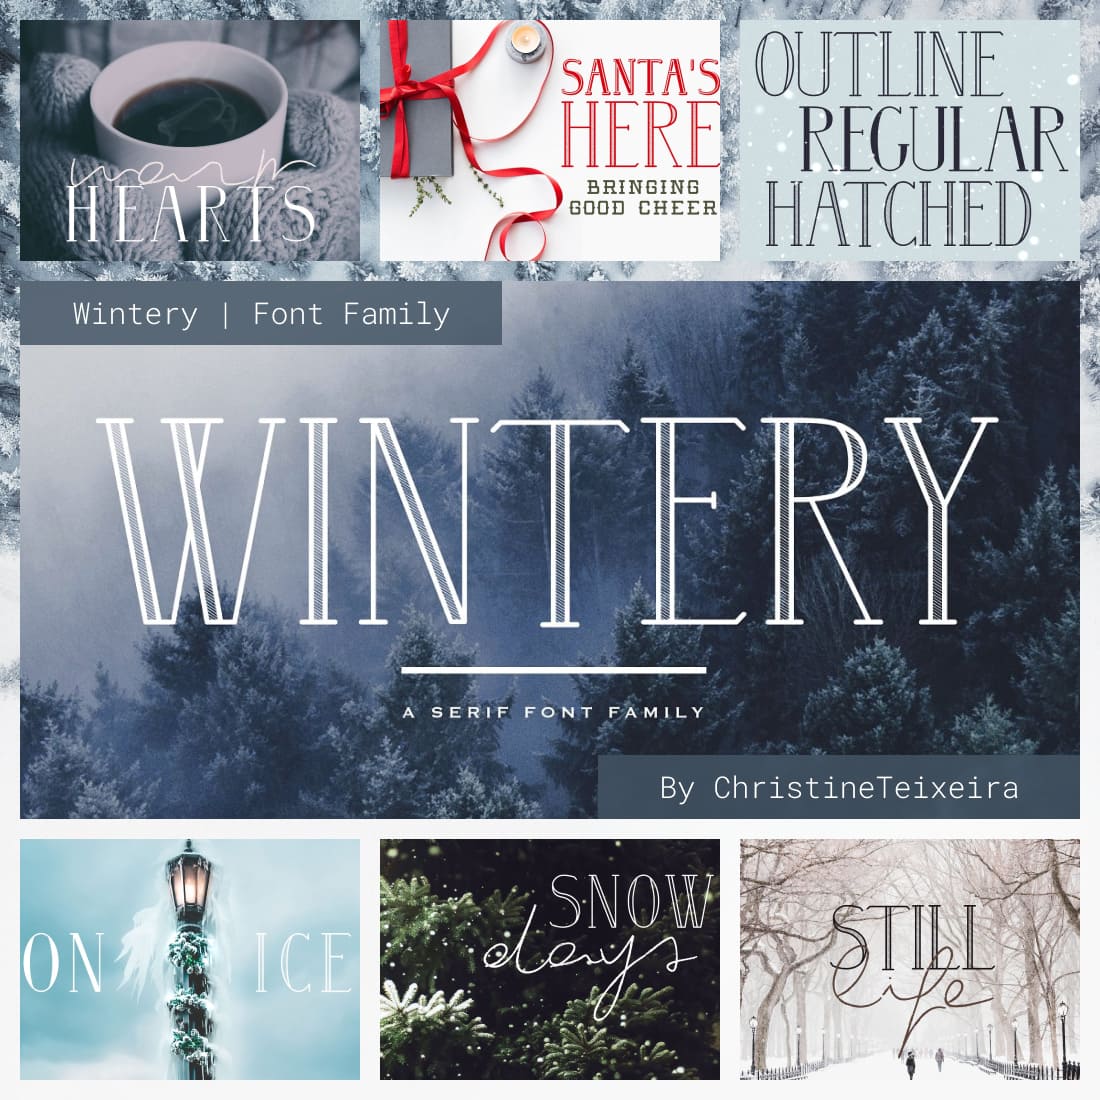 Wintery - A Serif Font Family By ChristineTeixeira "Snow Days".